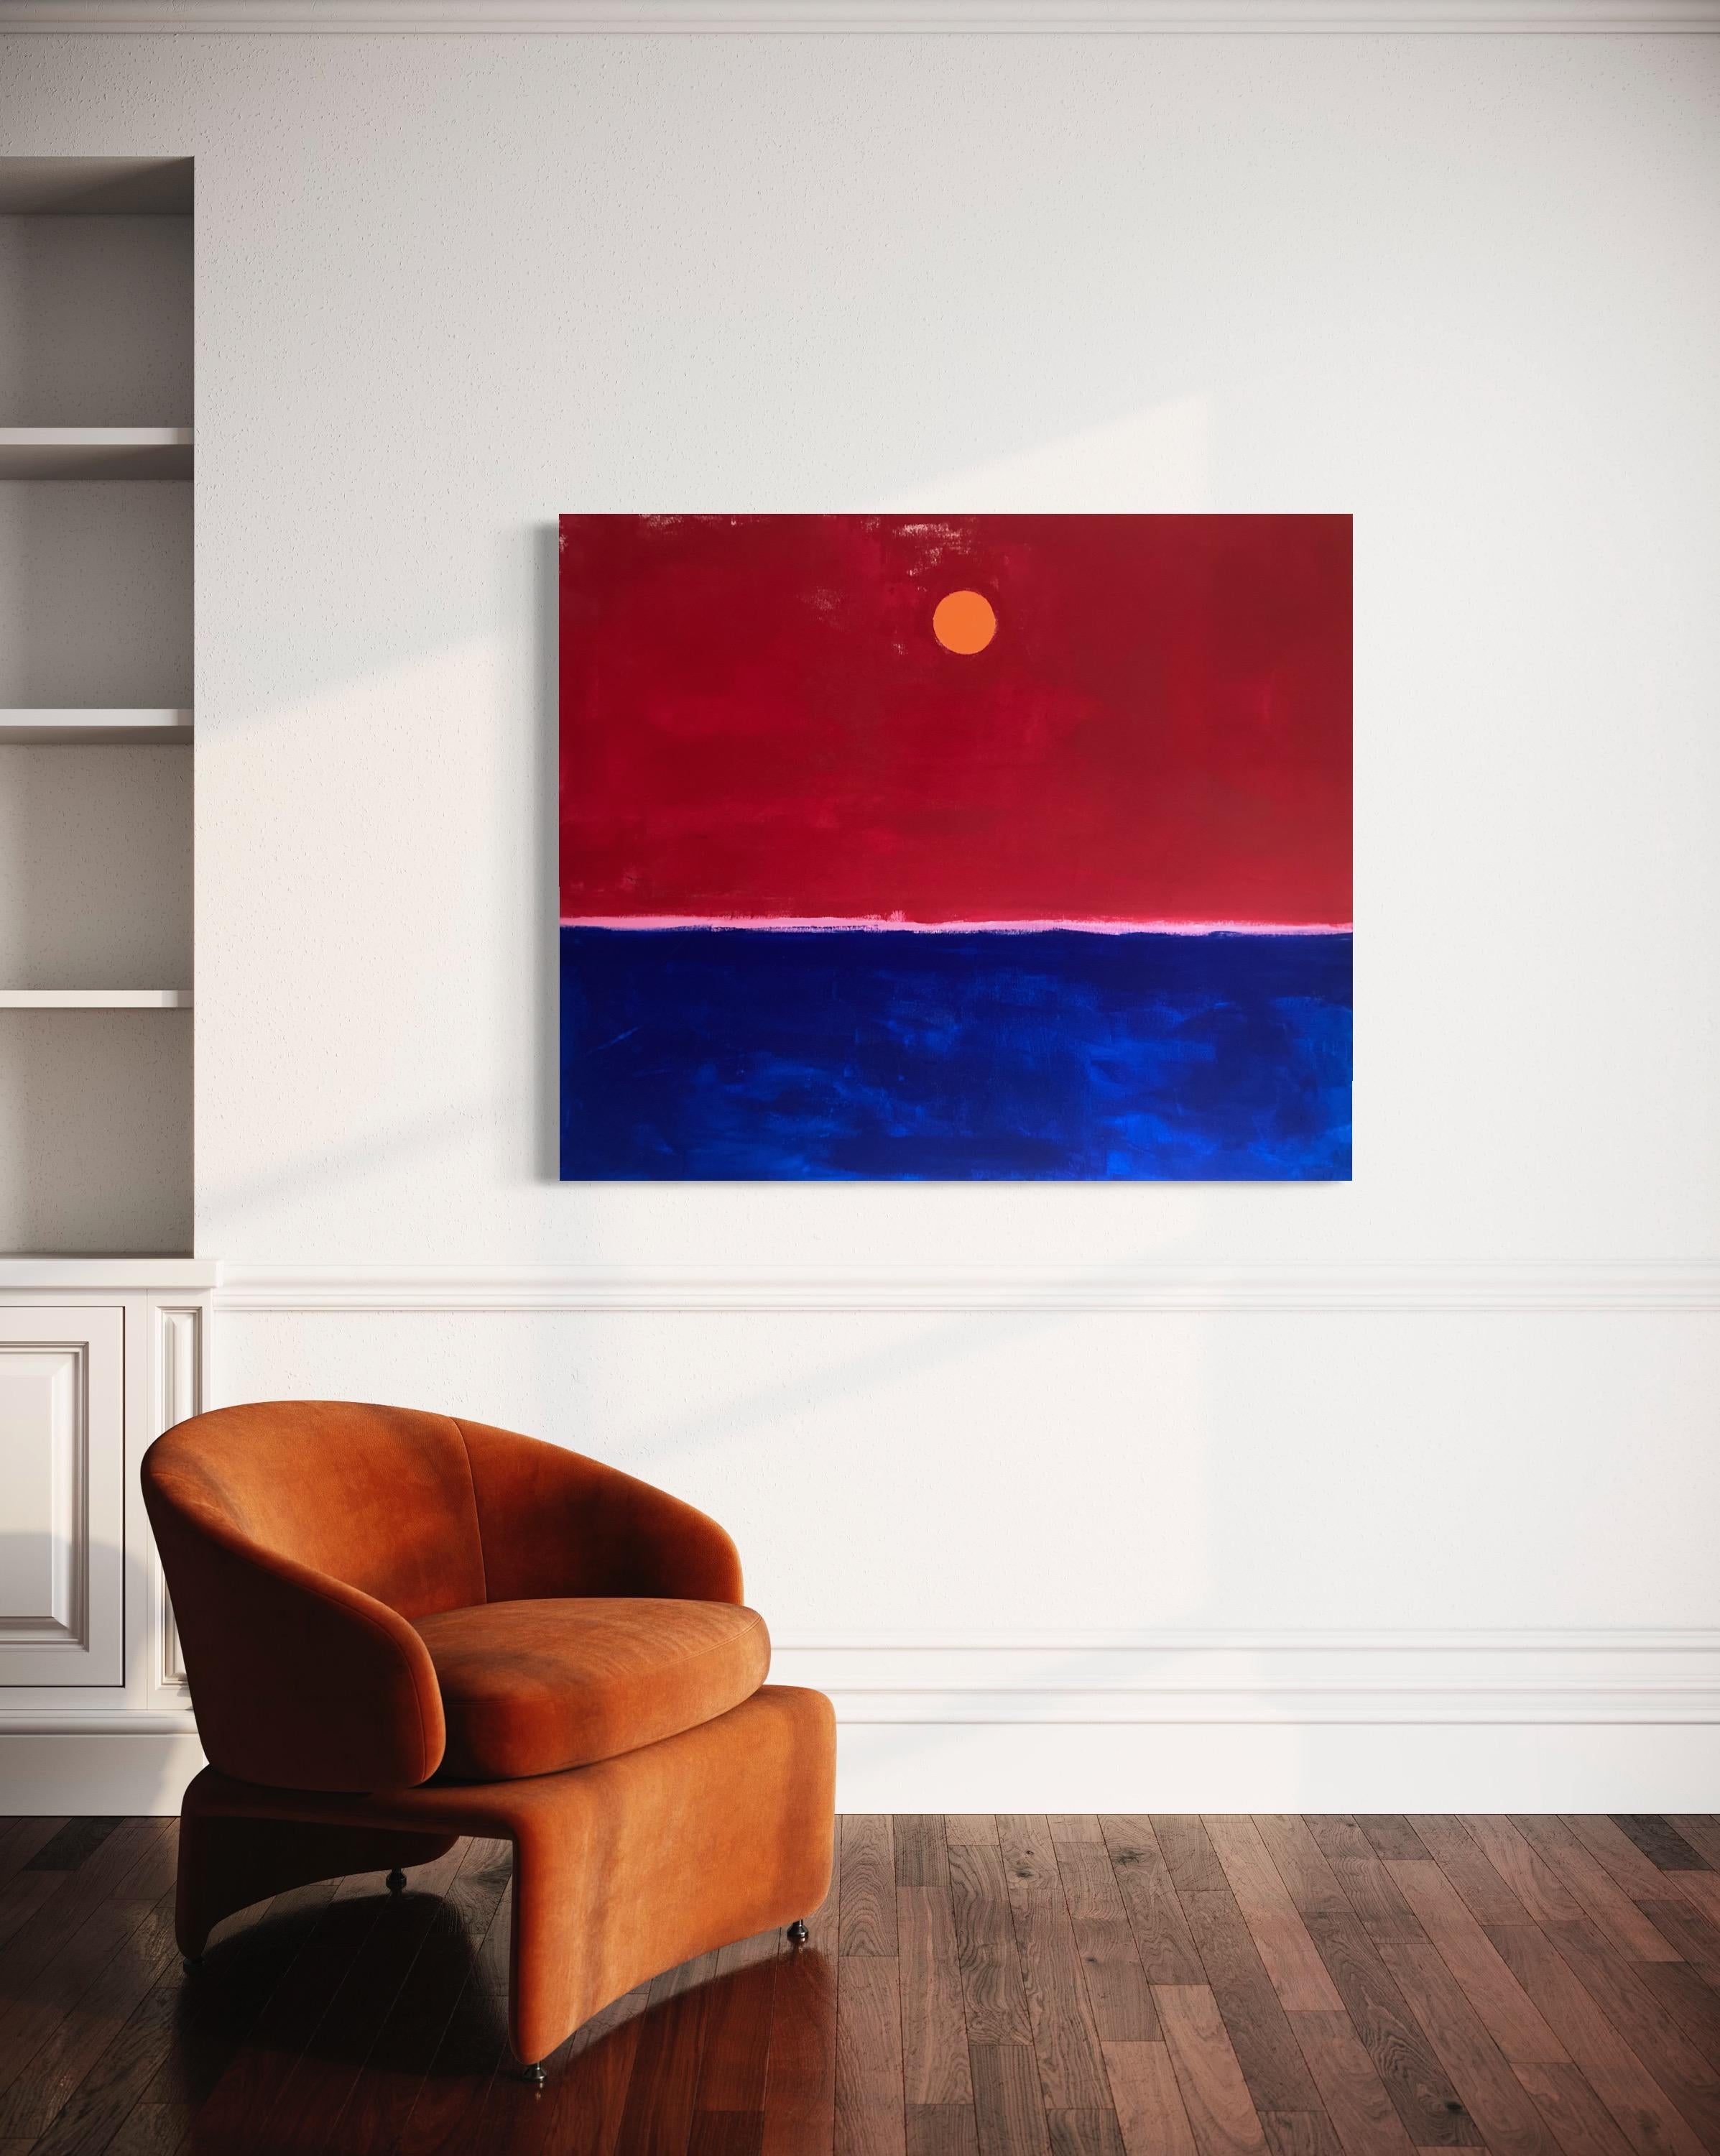 This painting shows the horizon in its silent and mysterious grandeur, separated by a thin strip of pink paint and a division of two colors. The painting was created with washes of high-grade French vinyl paint and creates a slightly glossy and rich